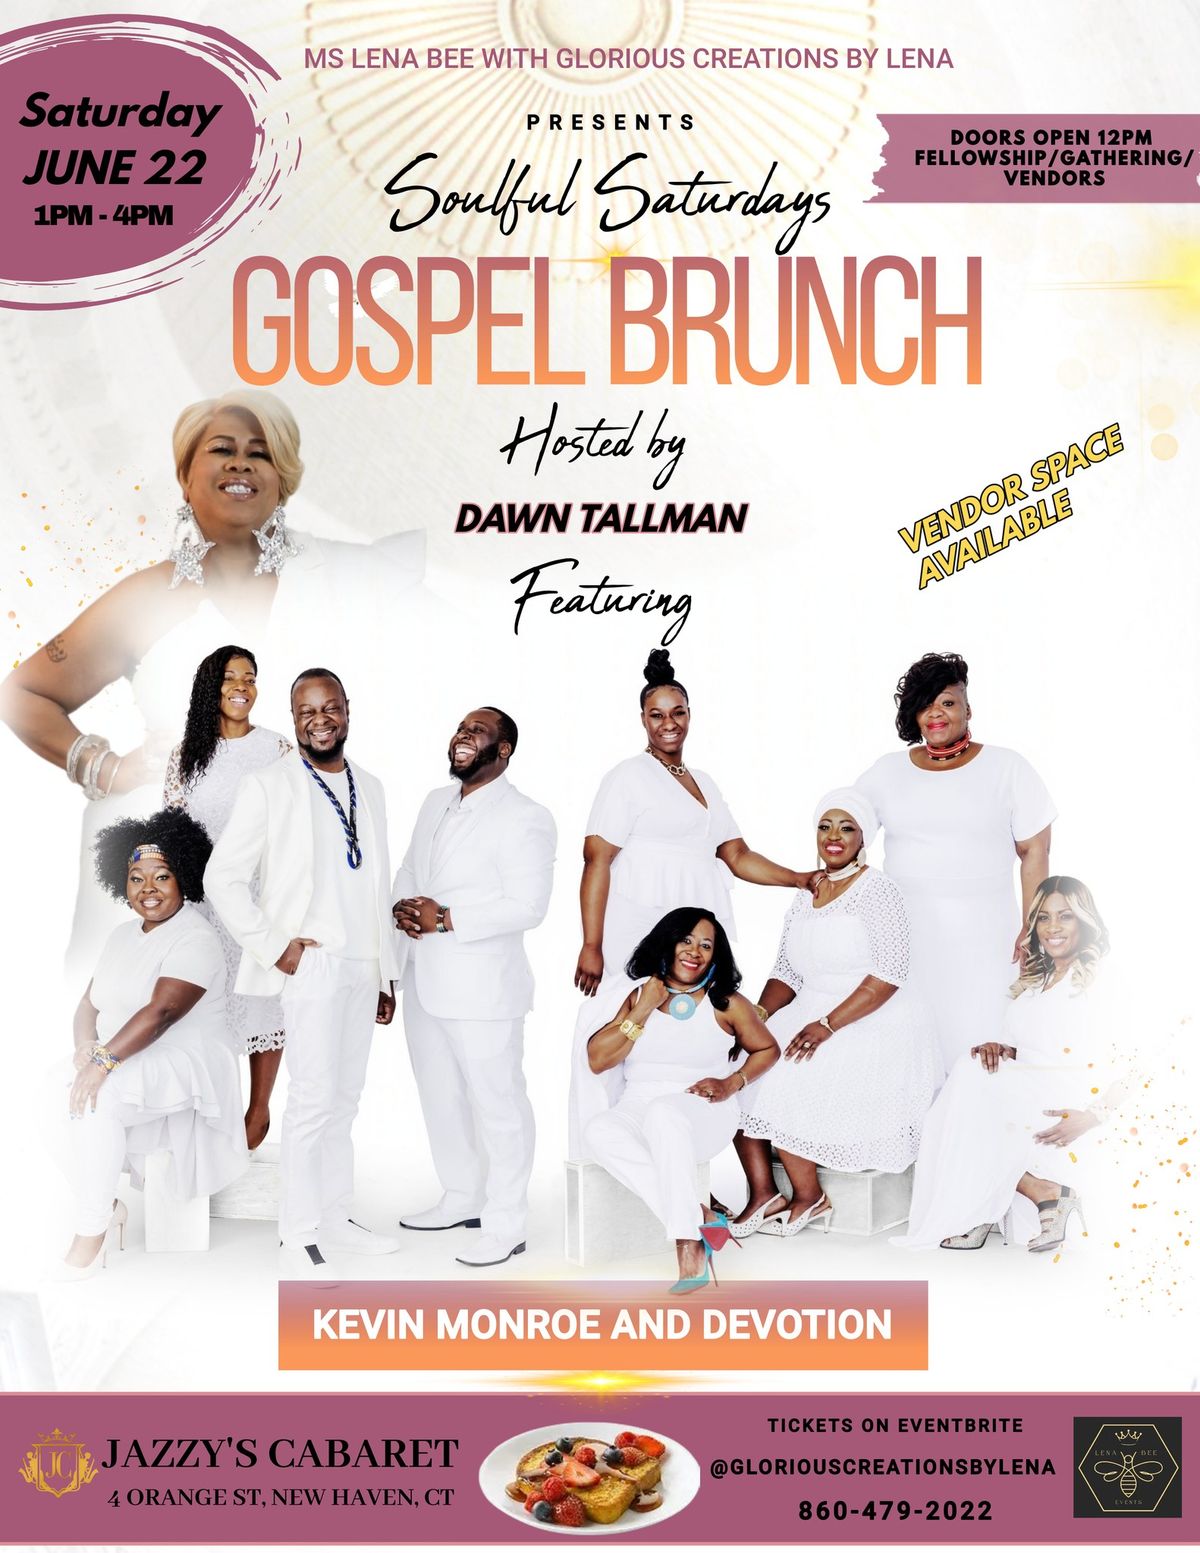 Soulful Saturdays Gospel Brunch with Kevin Monroe and Devotion